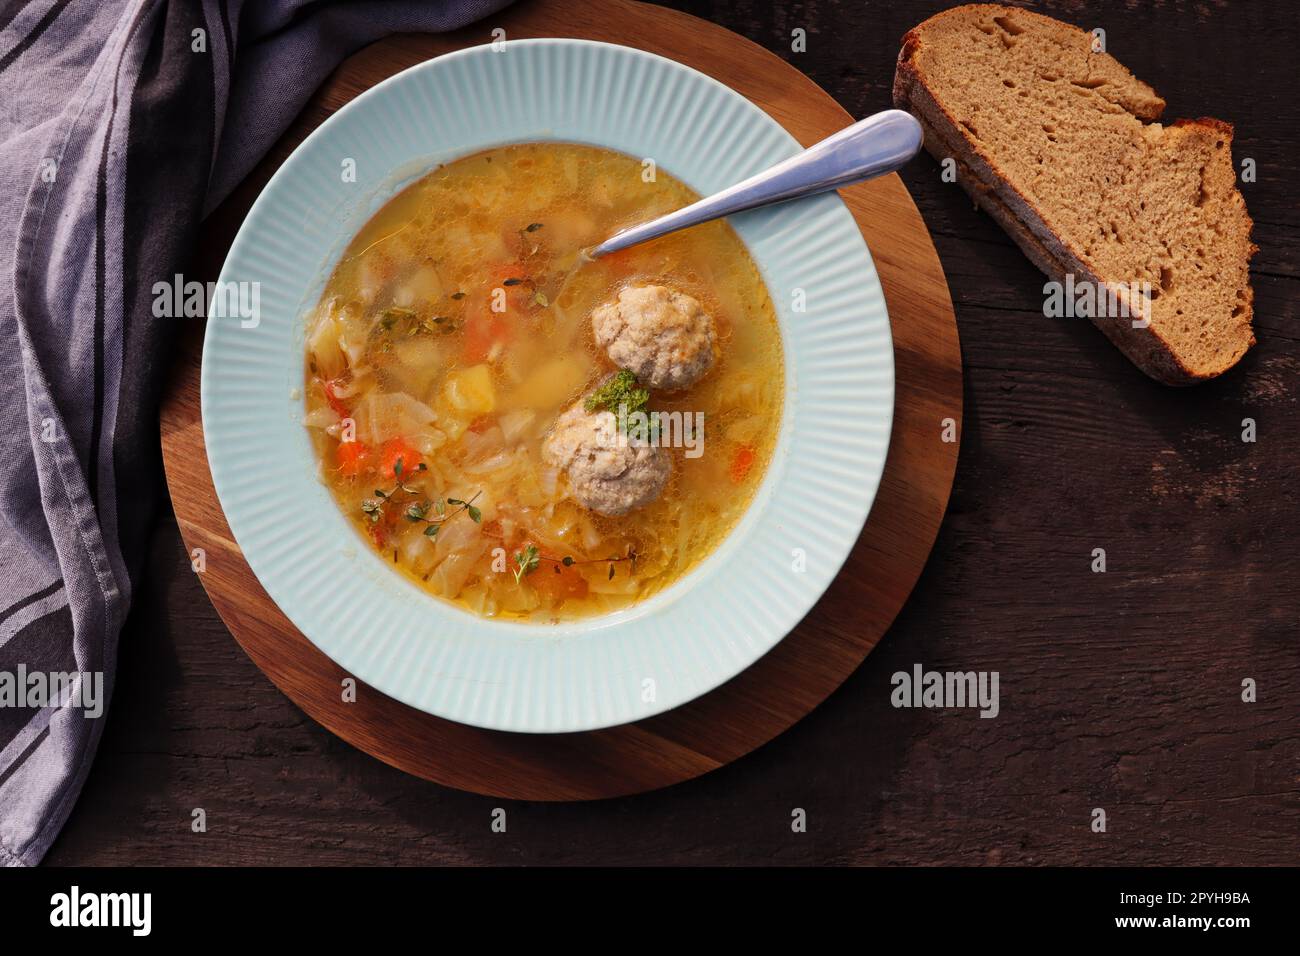 Soup with meatballs on dark background, gray linen napkin. Healthy meatball soup with vegetables. Top view Stock Photo